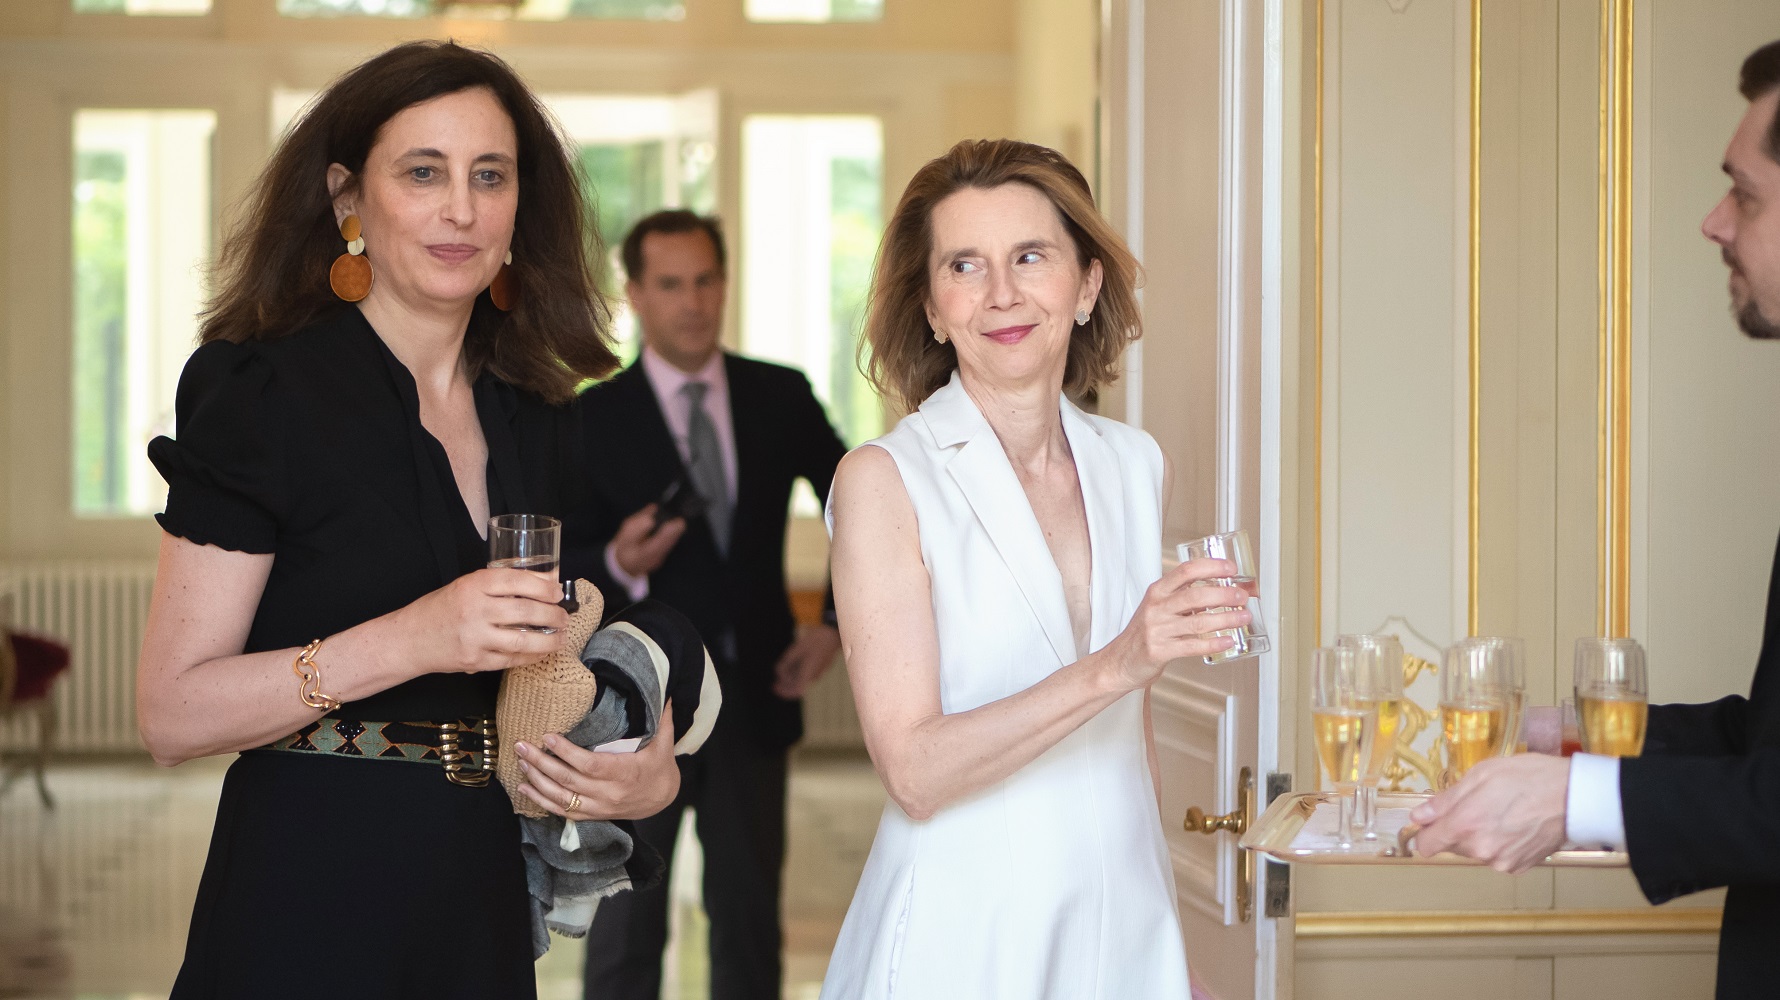 Visual aid: Two women getting soft drinks at an Event at the French Embassy in London